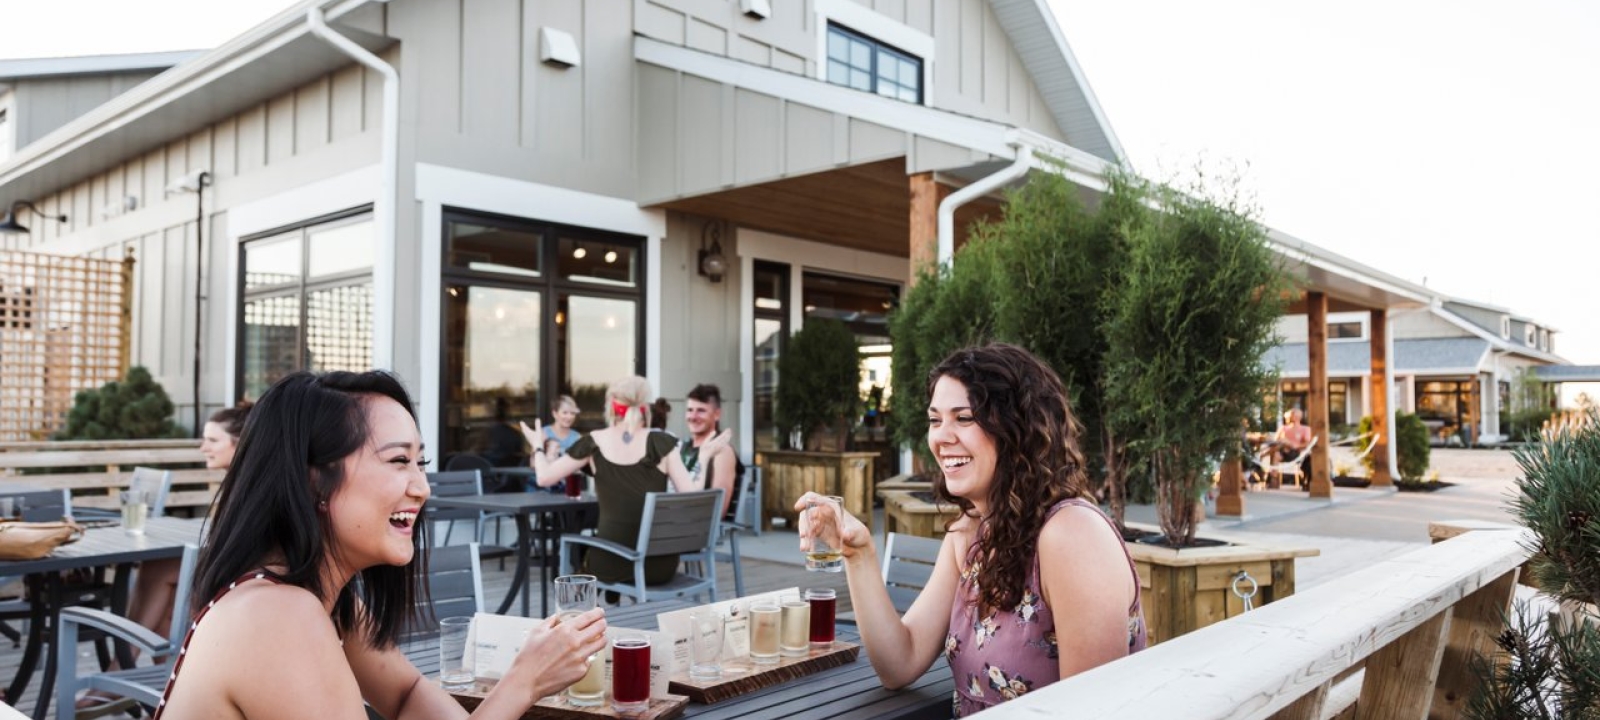 8 Patios to Check out in Saskatoon this Summer